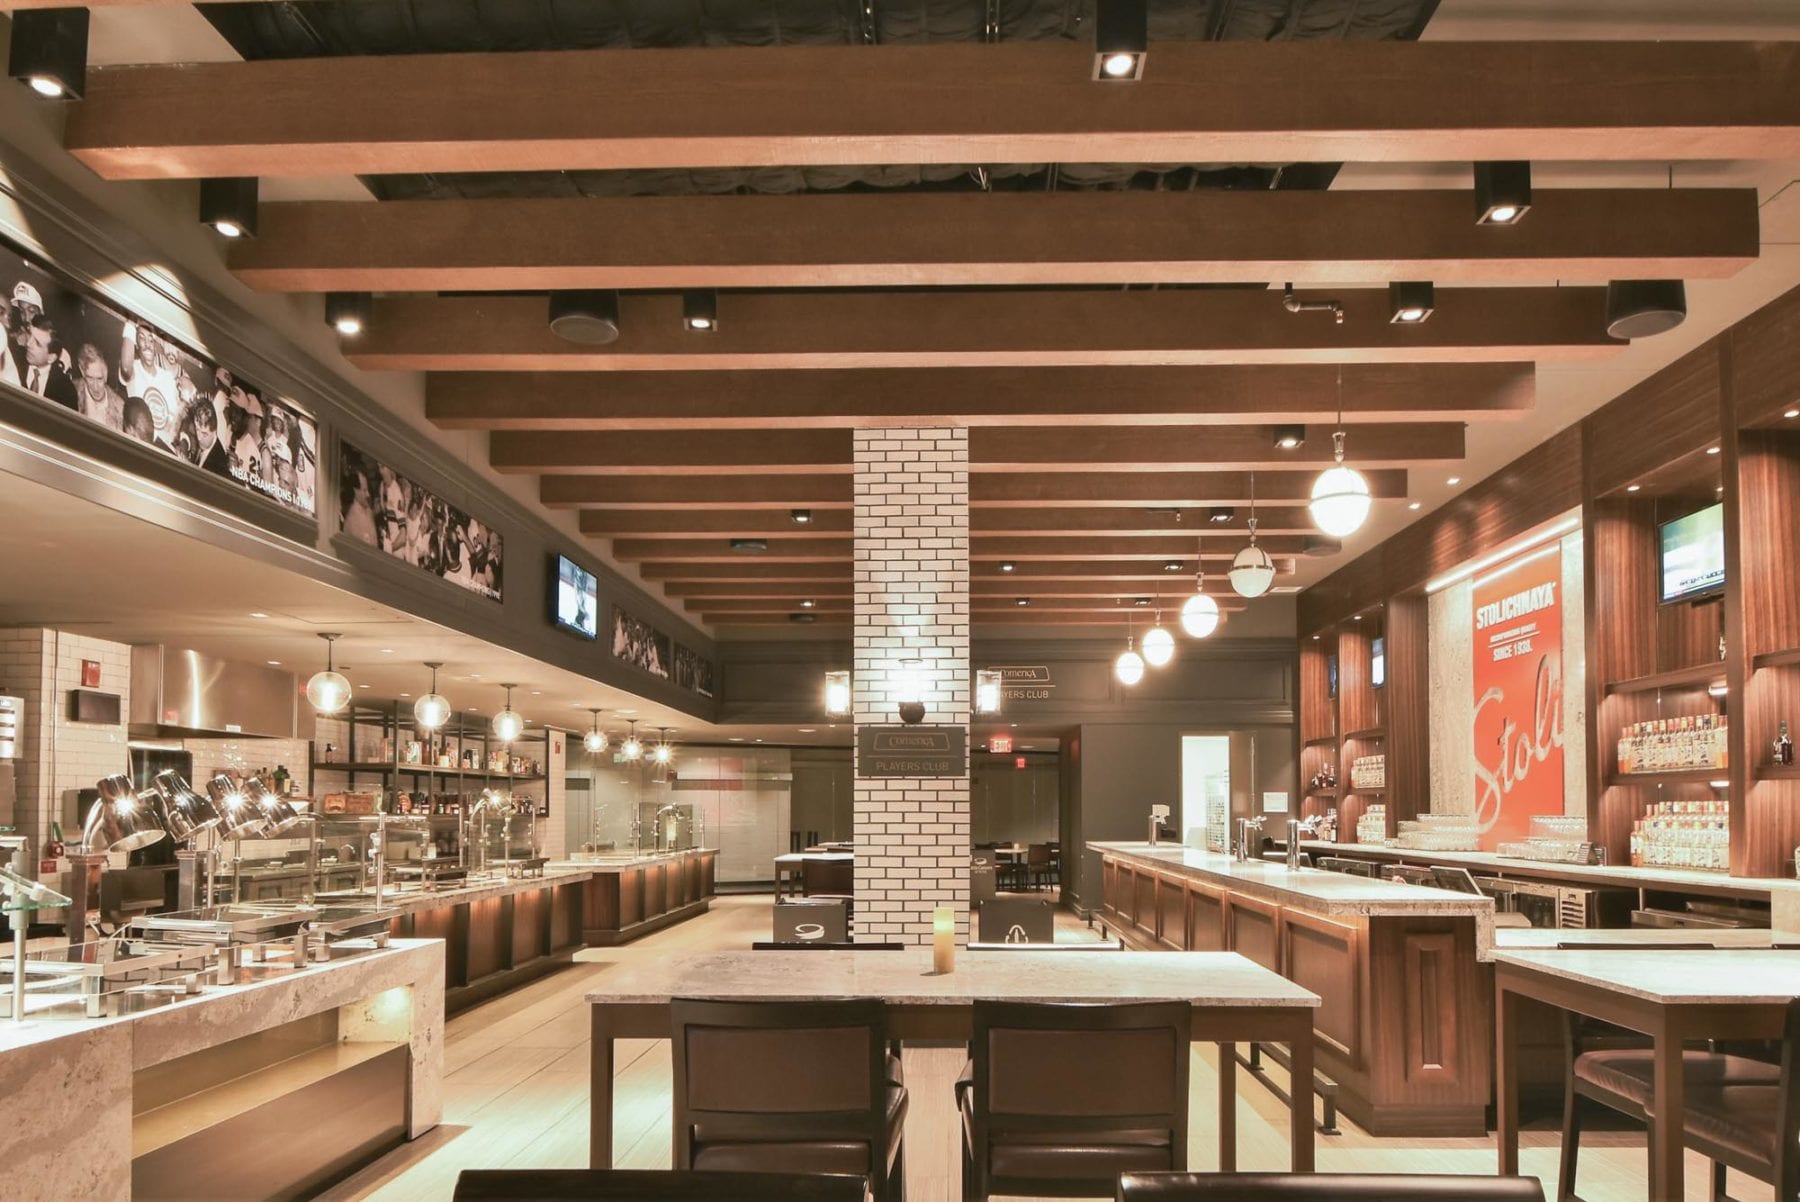 Young Caruso Denver Food Service Consultants little caesars arena Detroit design gallery